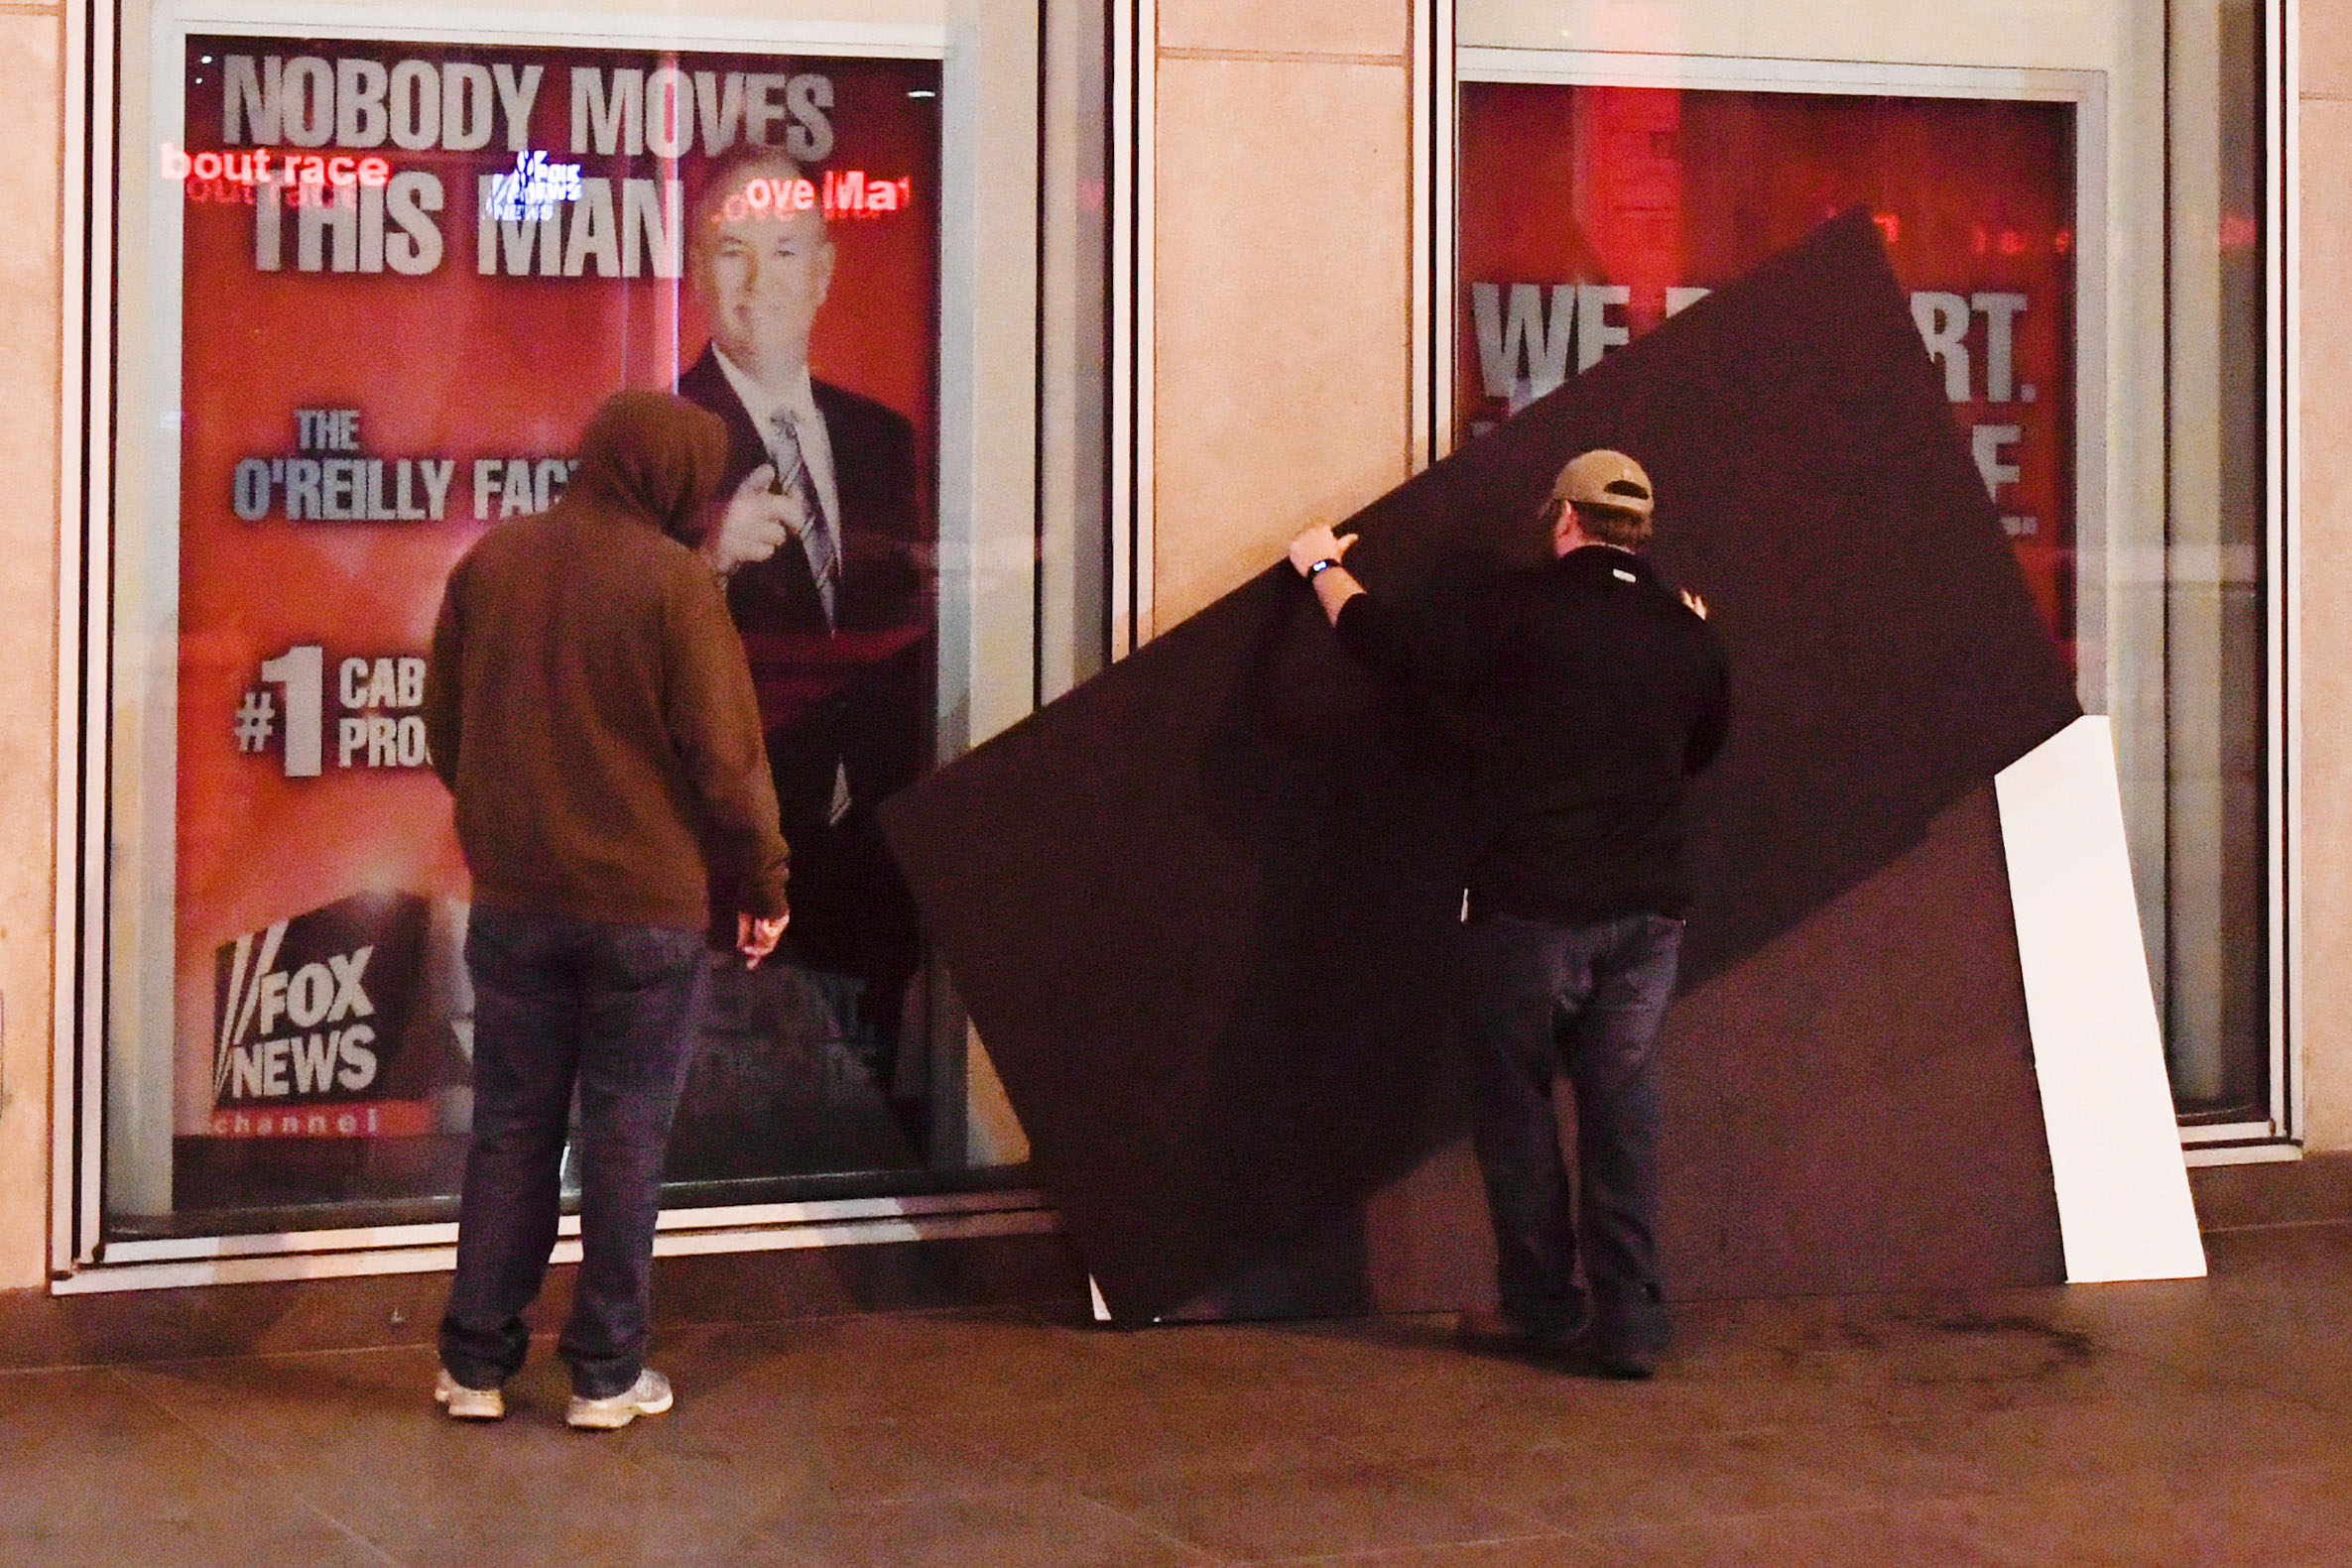 PHOTO: Men place boards over a poster of former cable news host Bill O'Reilly outside of the Fox News offices in Manhattan, April 20, 2017.